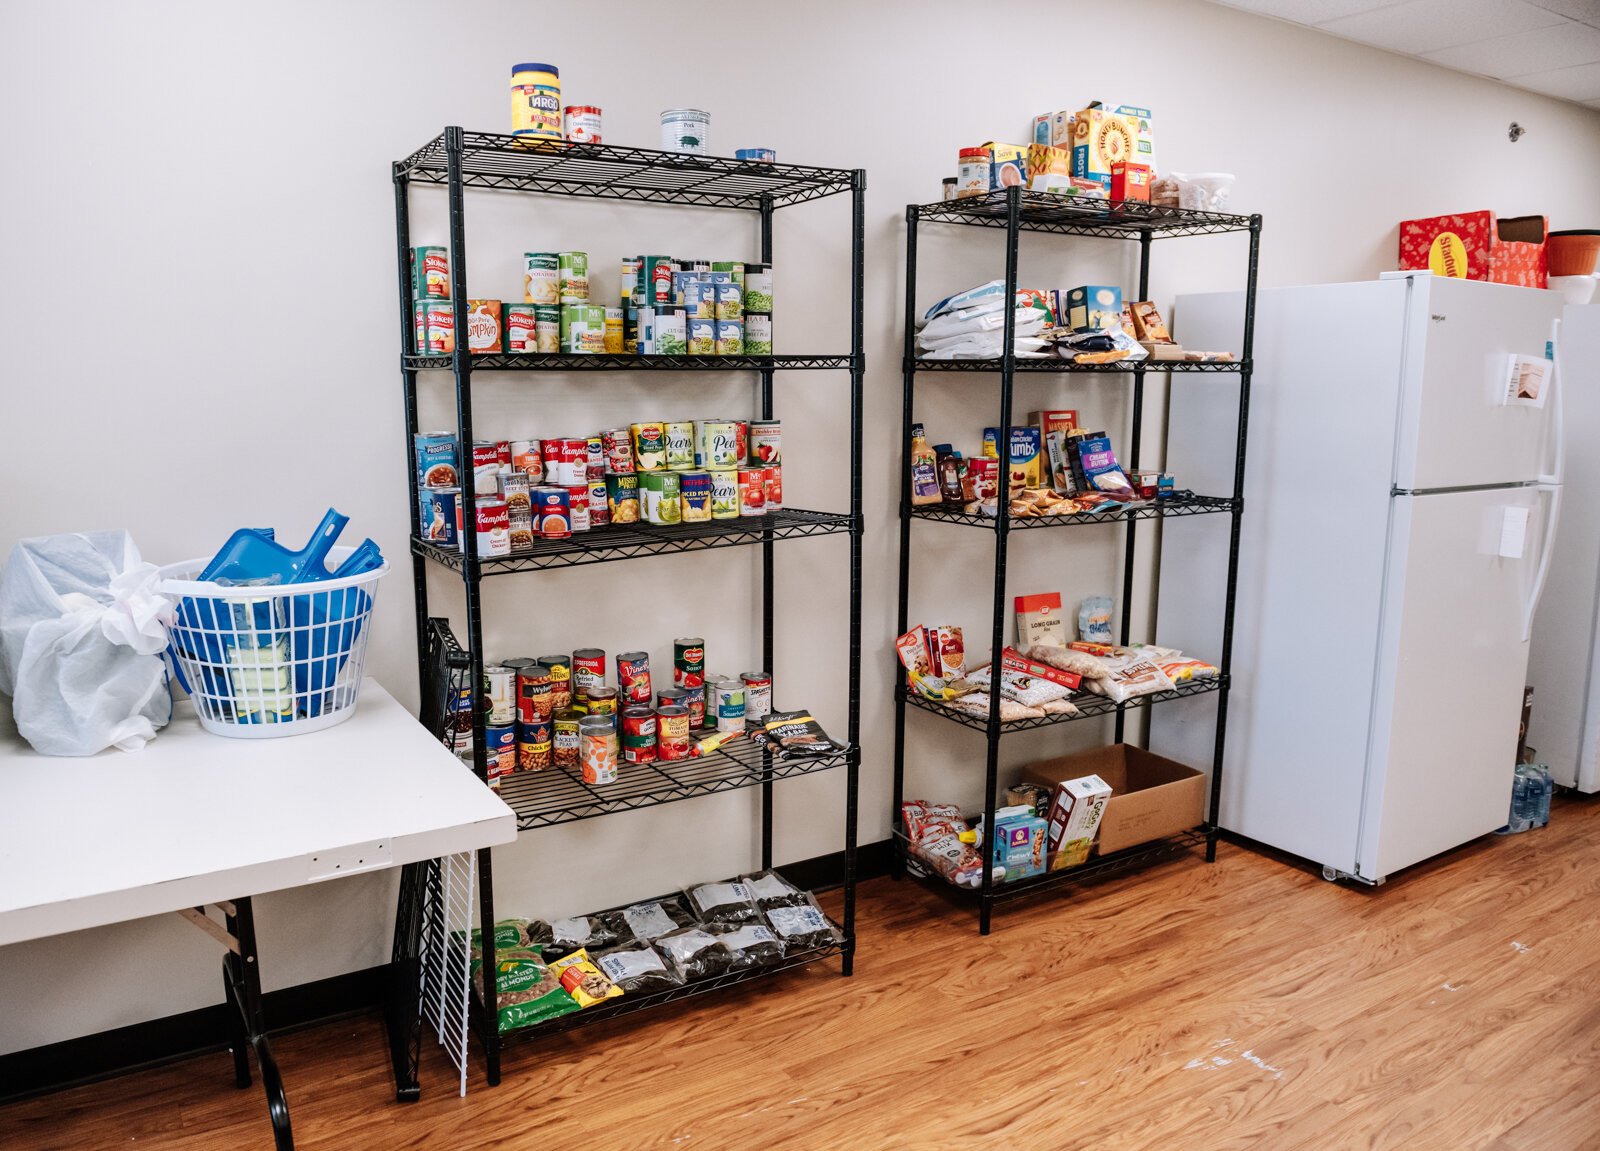 The community pantry is available because of private donations at River's Edge. River's Edge is a supportive housing complex on Spy Run Ave. Ext. in Fort Wayne.